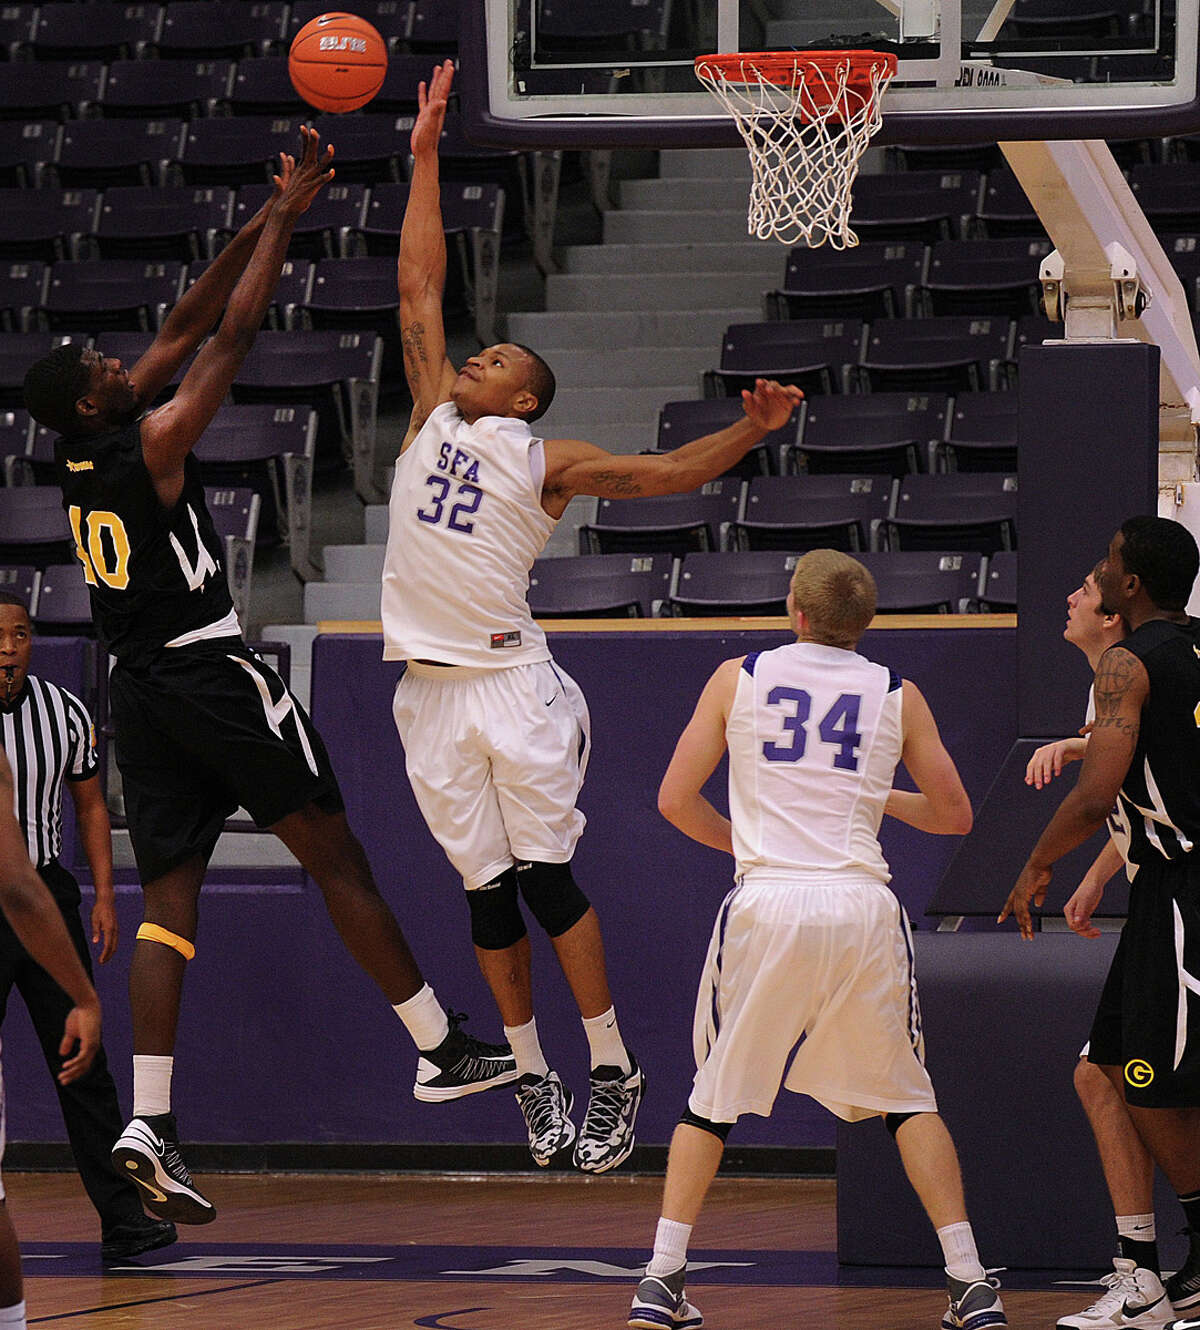 Stephen F. Austin senior forward Taylor Smith, a Clemens grad, tries to block a shot by Grambling center Peter Robinson in a 60-38 SFA victory on Dec. 20, 2012. Smith, who leads the nation in field-goal percentage, is among the top 10 in blocks per game.